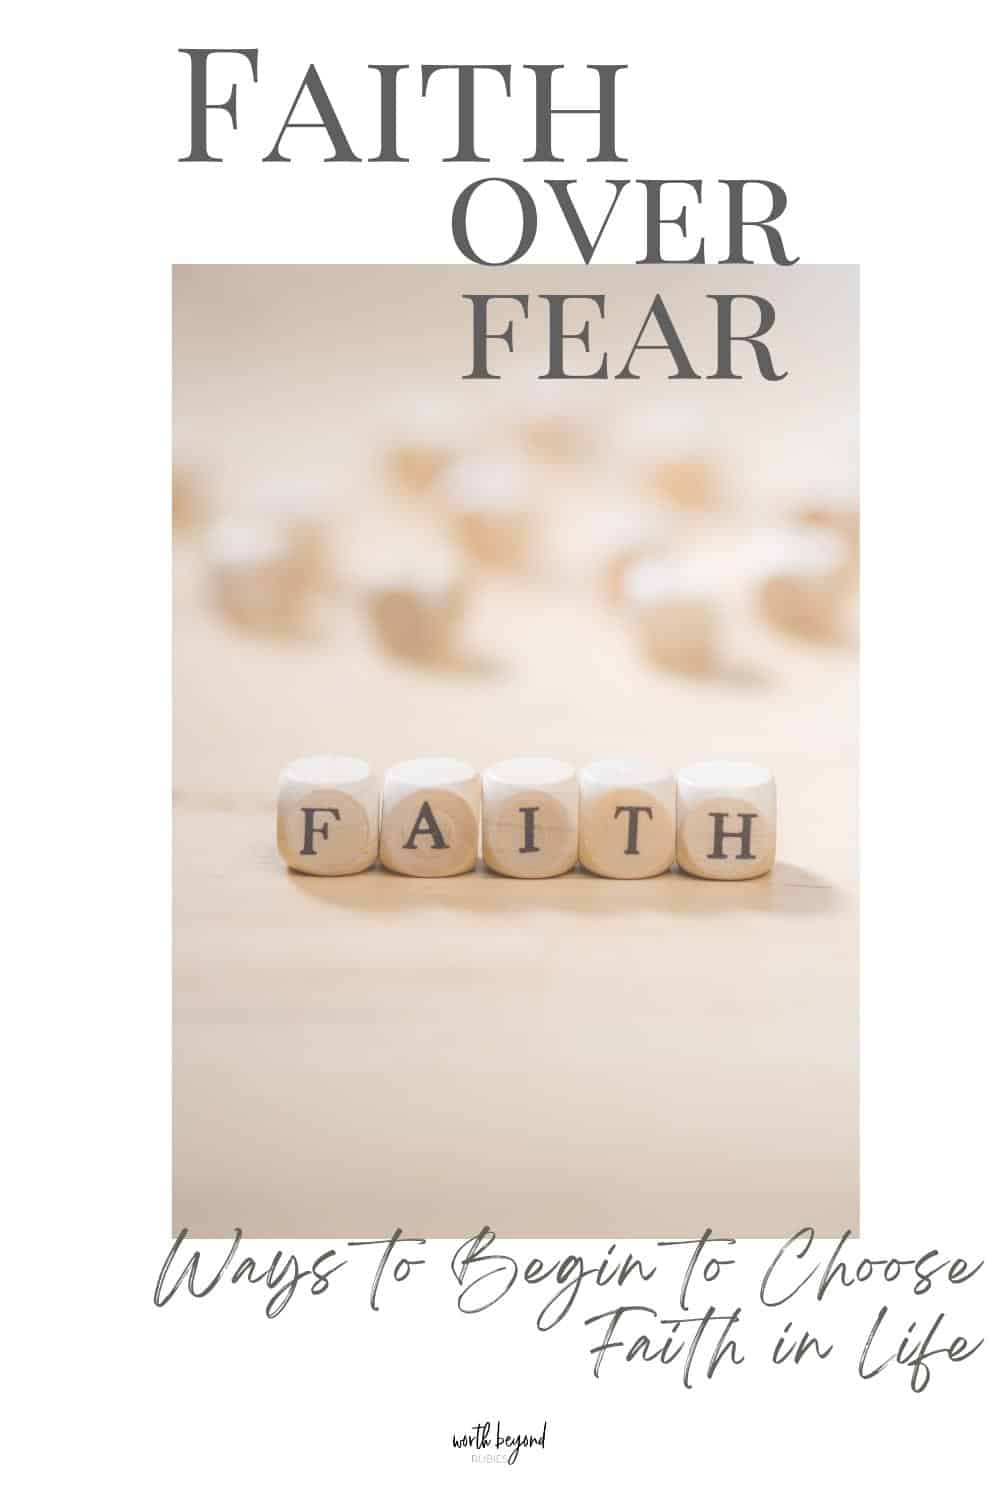 Faith word on blocks with text overlay that says Faith Over Fear - Ways to Begin to Choose Faith in Life and the Worth Beyond Rubies logo at bottom of the image.